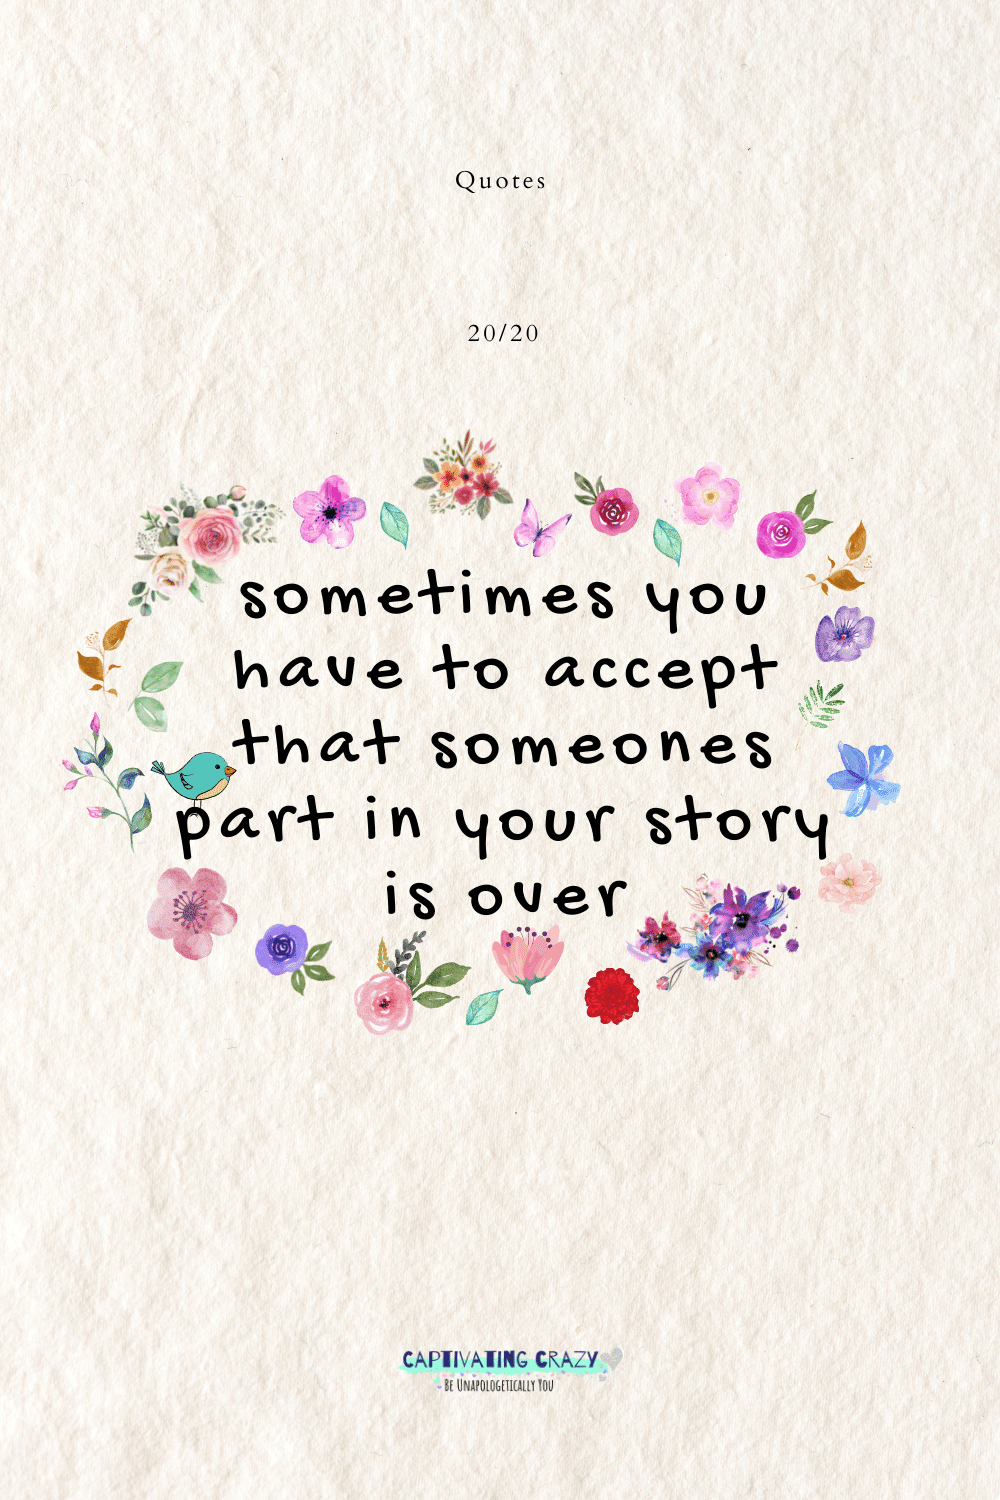 Sometimes you have to accept that someone's part in your story is over. 